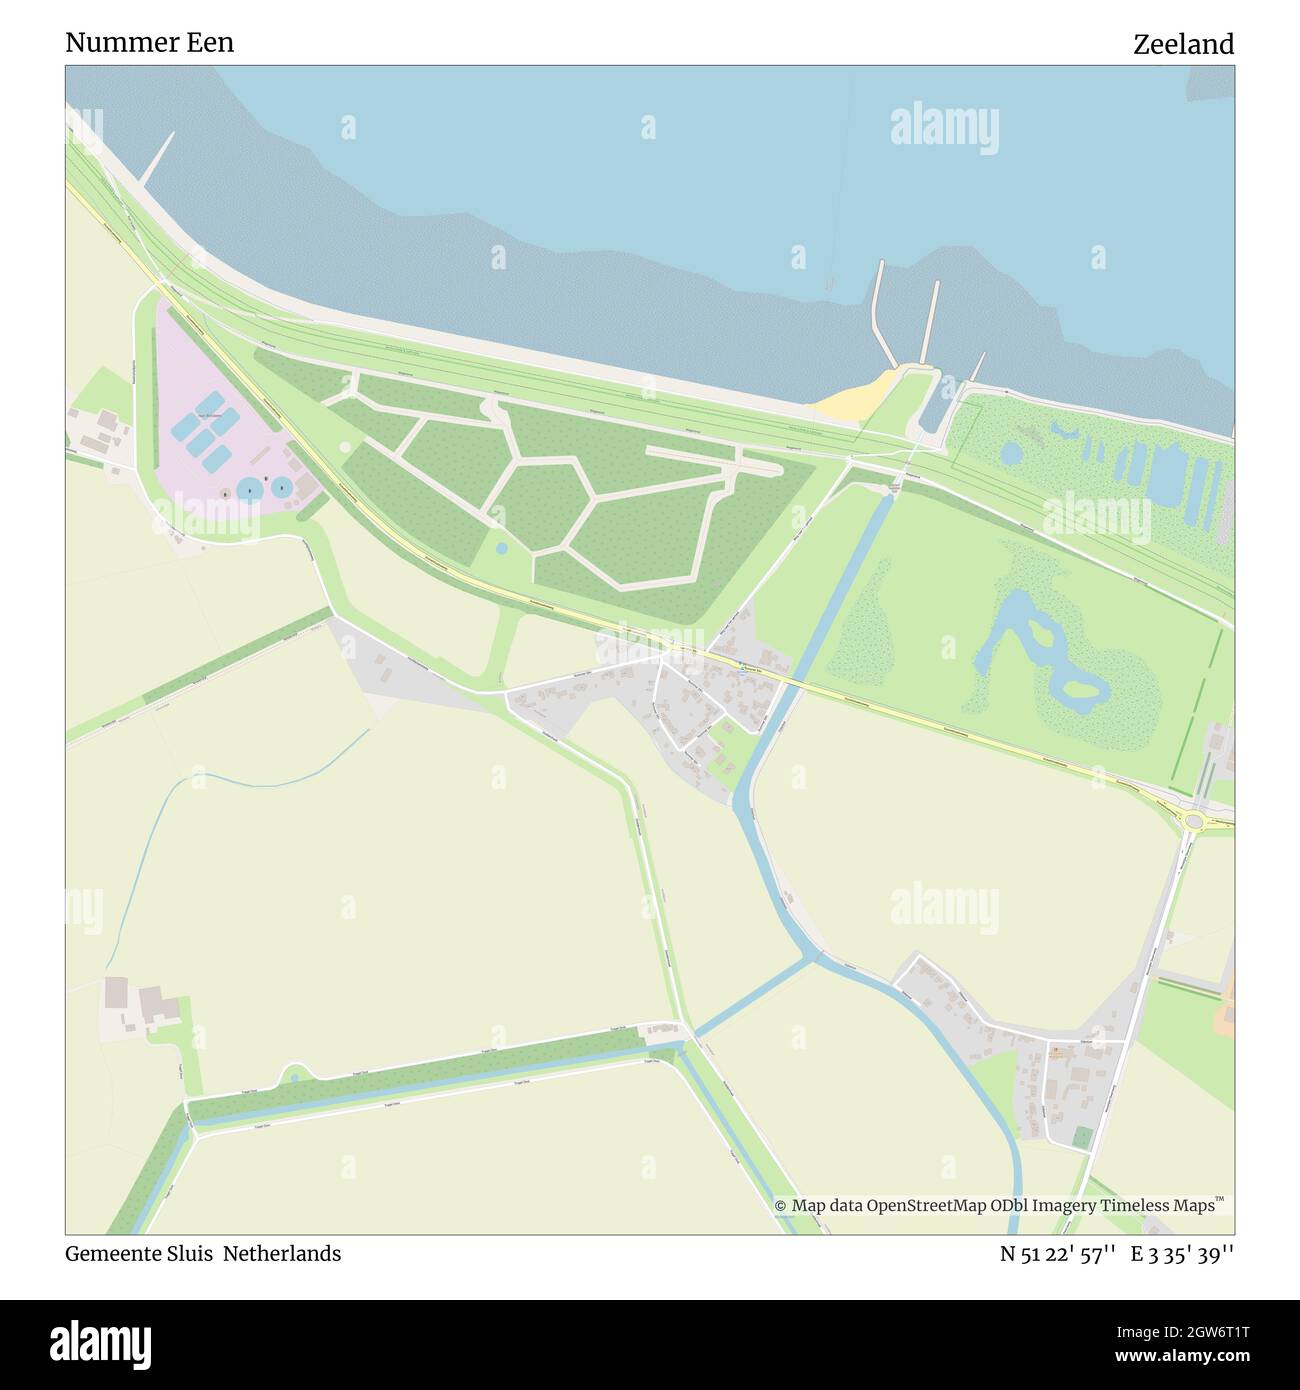 Nummer Een, Gemeente Sluis, Netherlands, Zeeland, N 51 22' 57'', E 3 35' 39'', map, Timeless Map published in 2021. Travelers, explorers and adventurers like Florence Nightingale, David Livingstone, Ernest Shackleton, Lewis and Clark and Sherlock Holmes relied on maps to plan travels to the world's most remote corners, Timeless Maps is mapping most locations on the globe, showing the achievement of great dreams Stock Photo